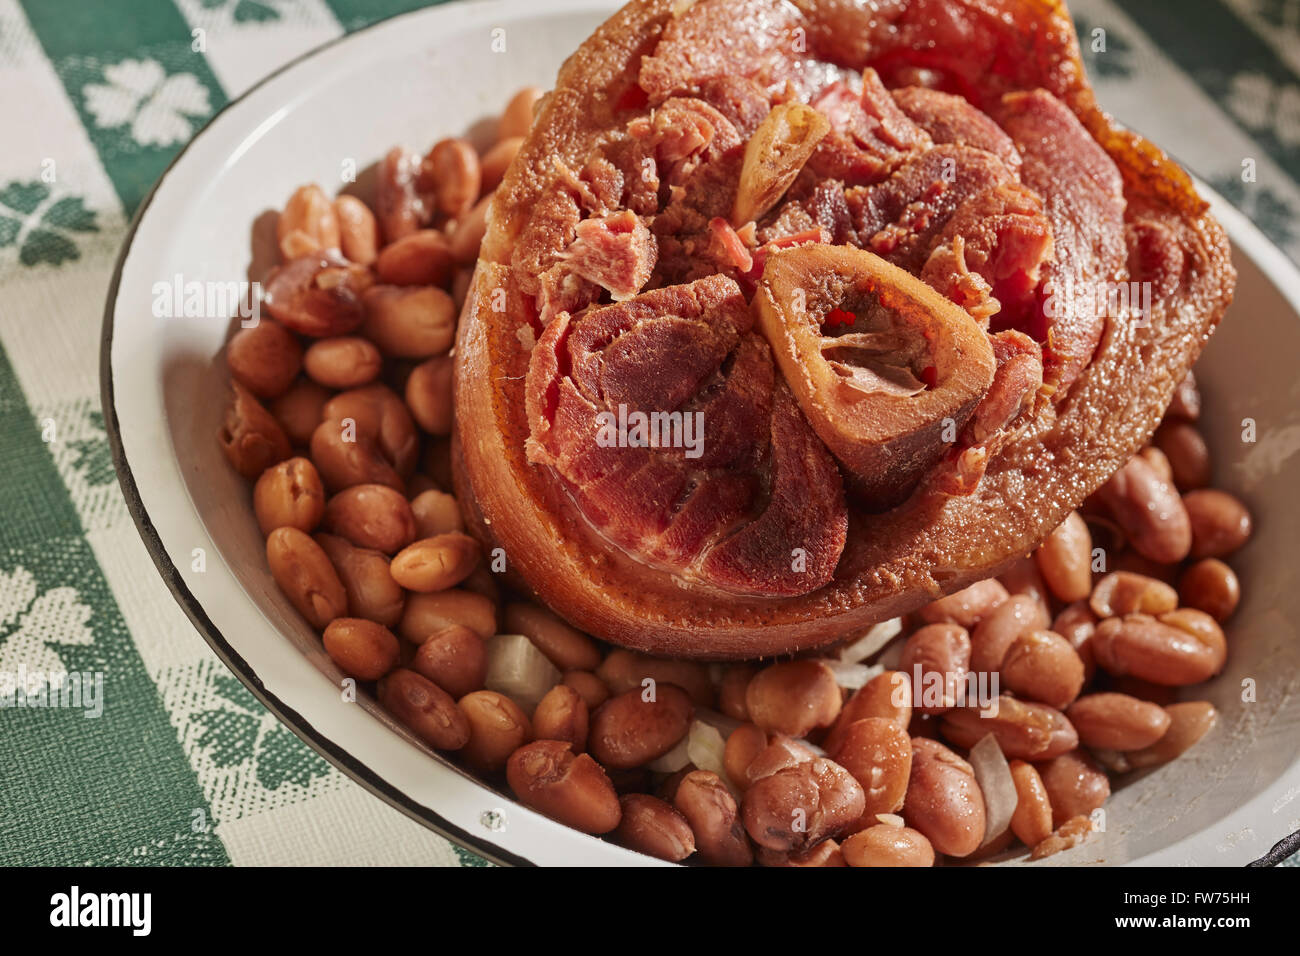 A cooked ham hock with pinto beans, called 'soup beans' in Appalachia, USA Stock Photo